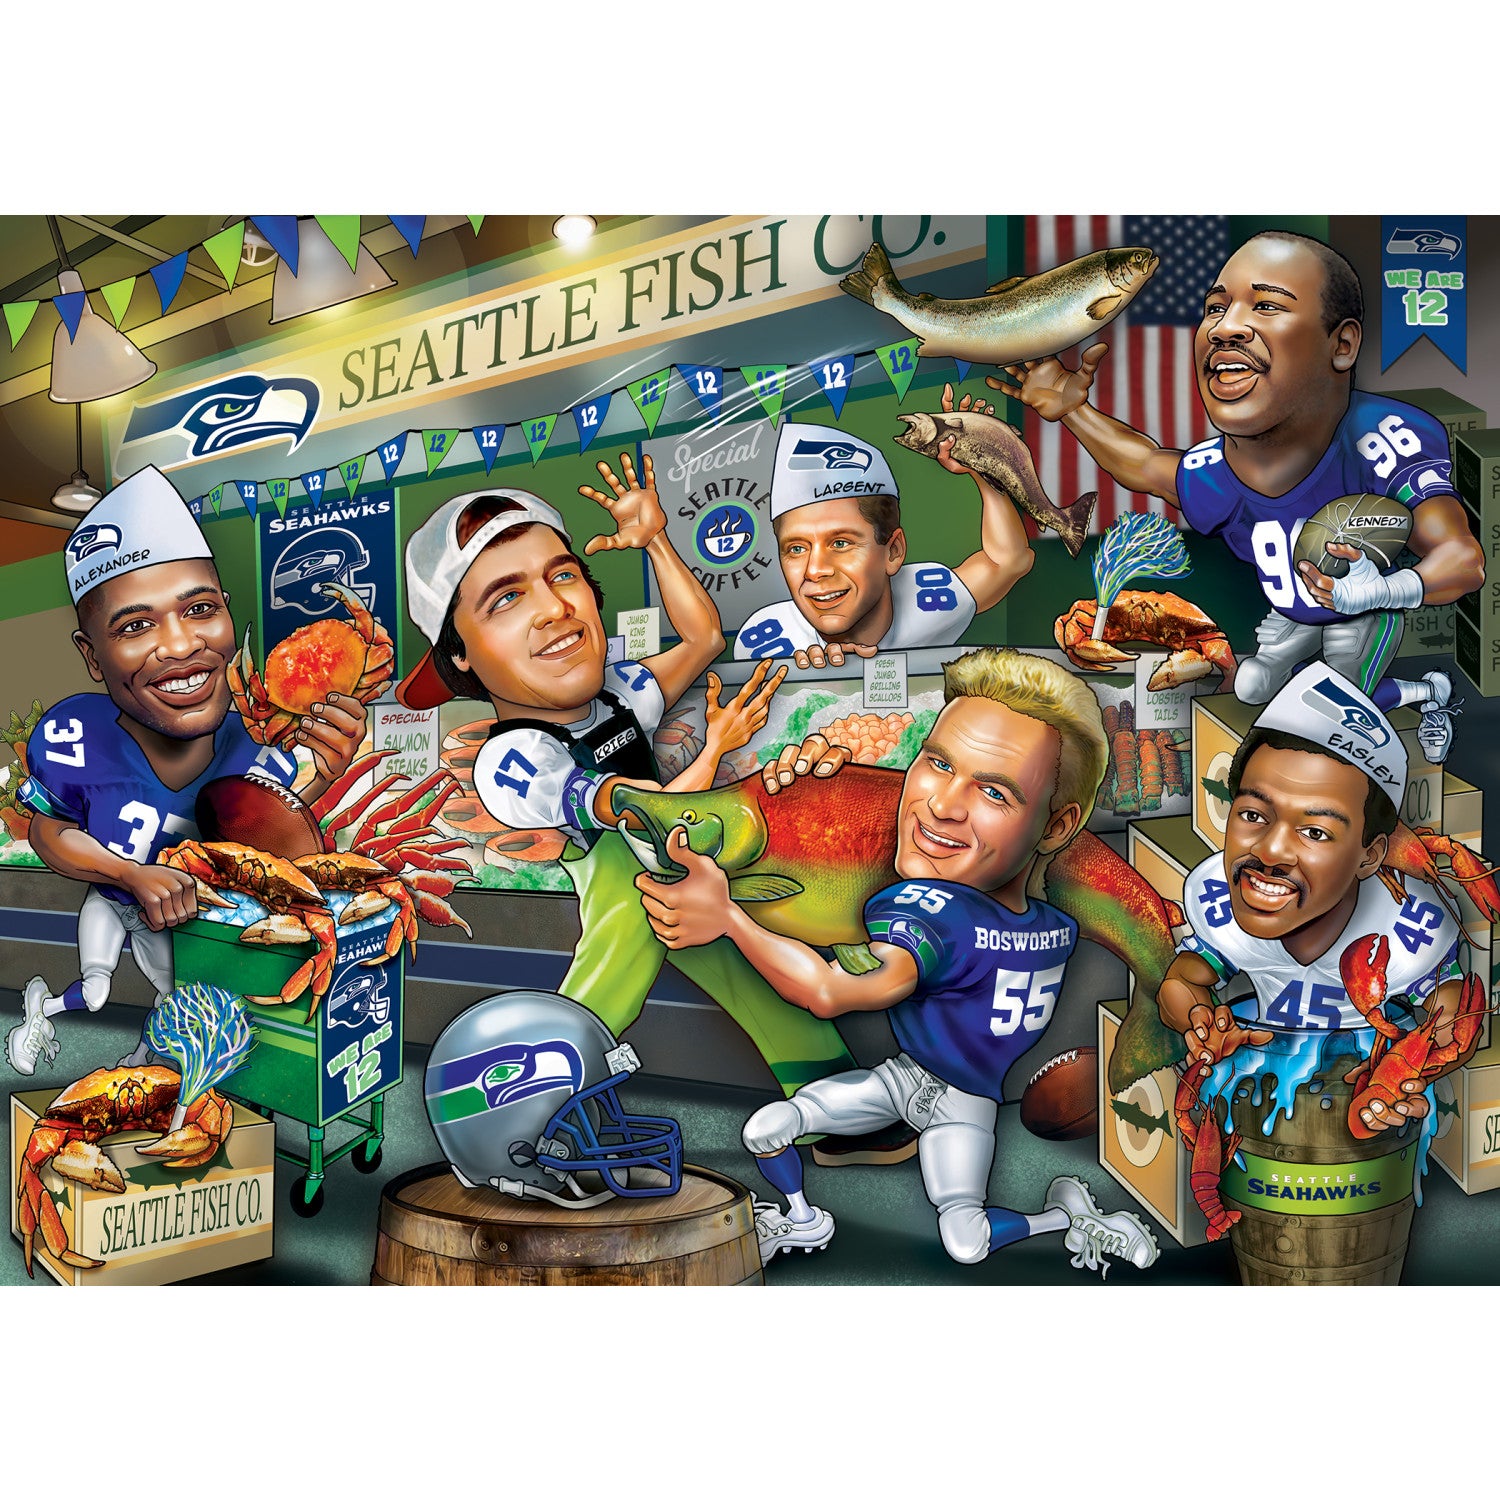 Seattle Seahawks - All Time Greats 500 Piece Puzzle